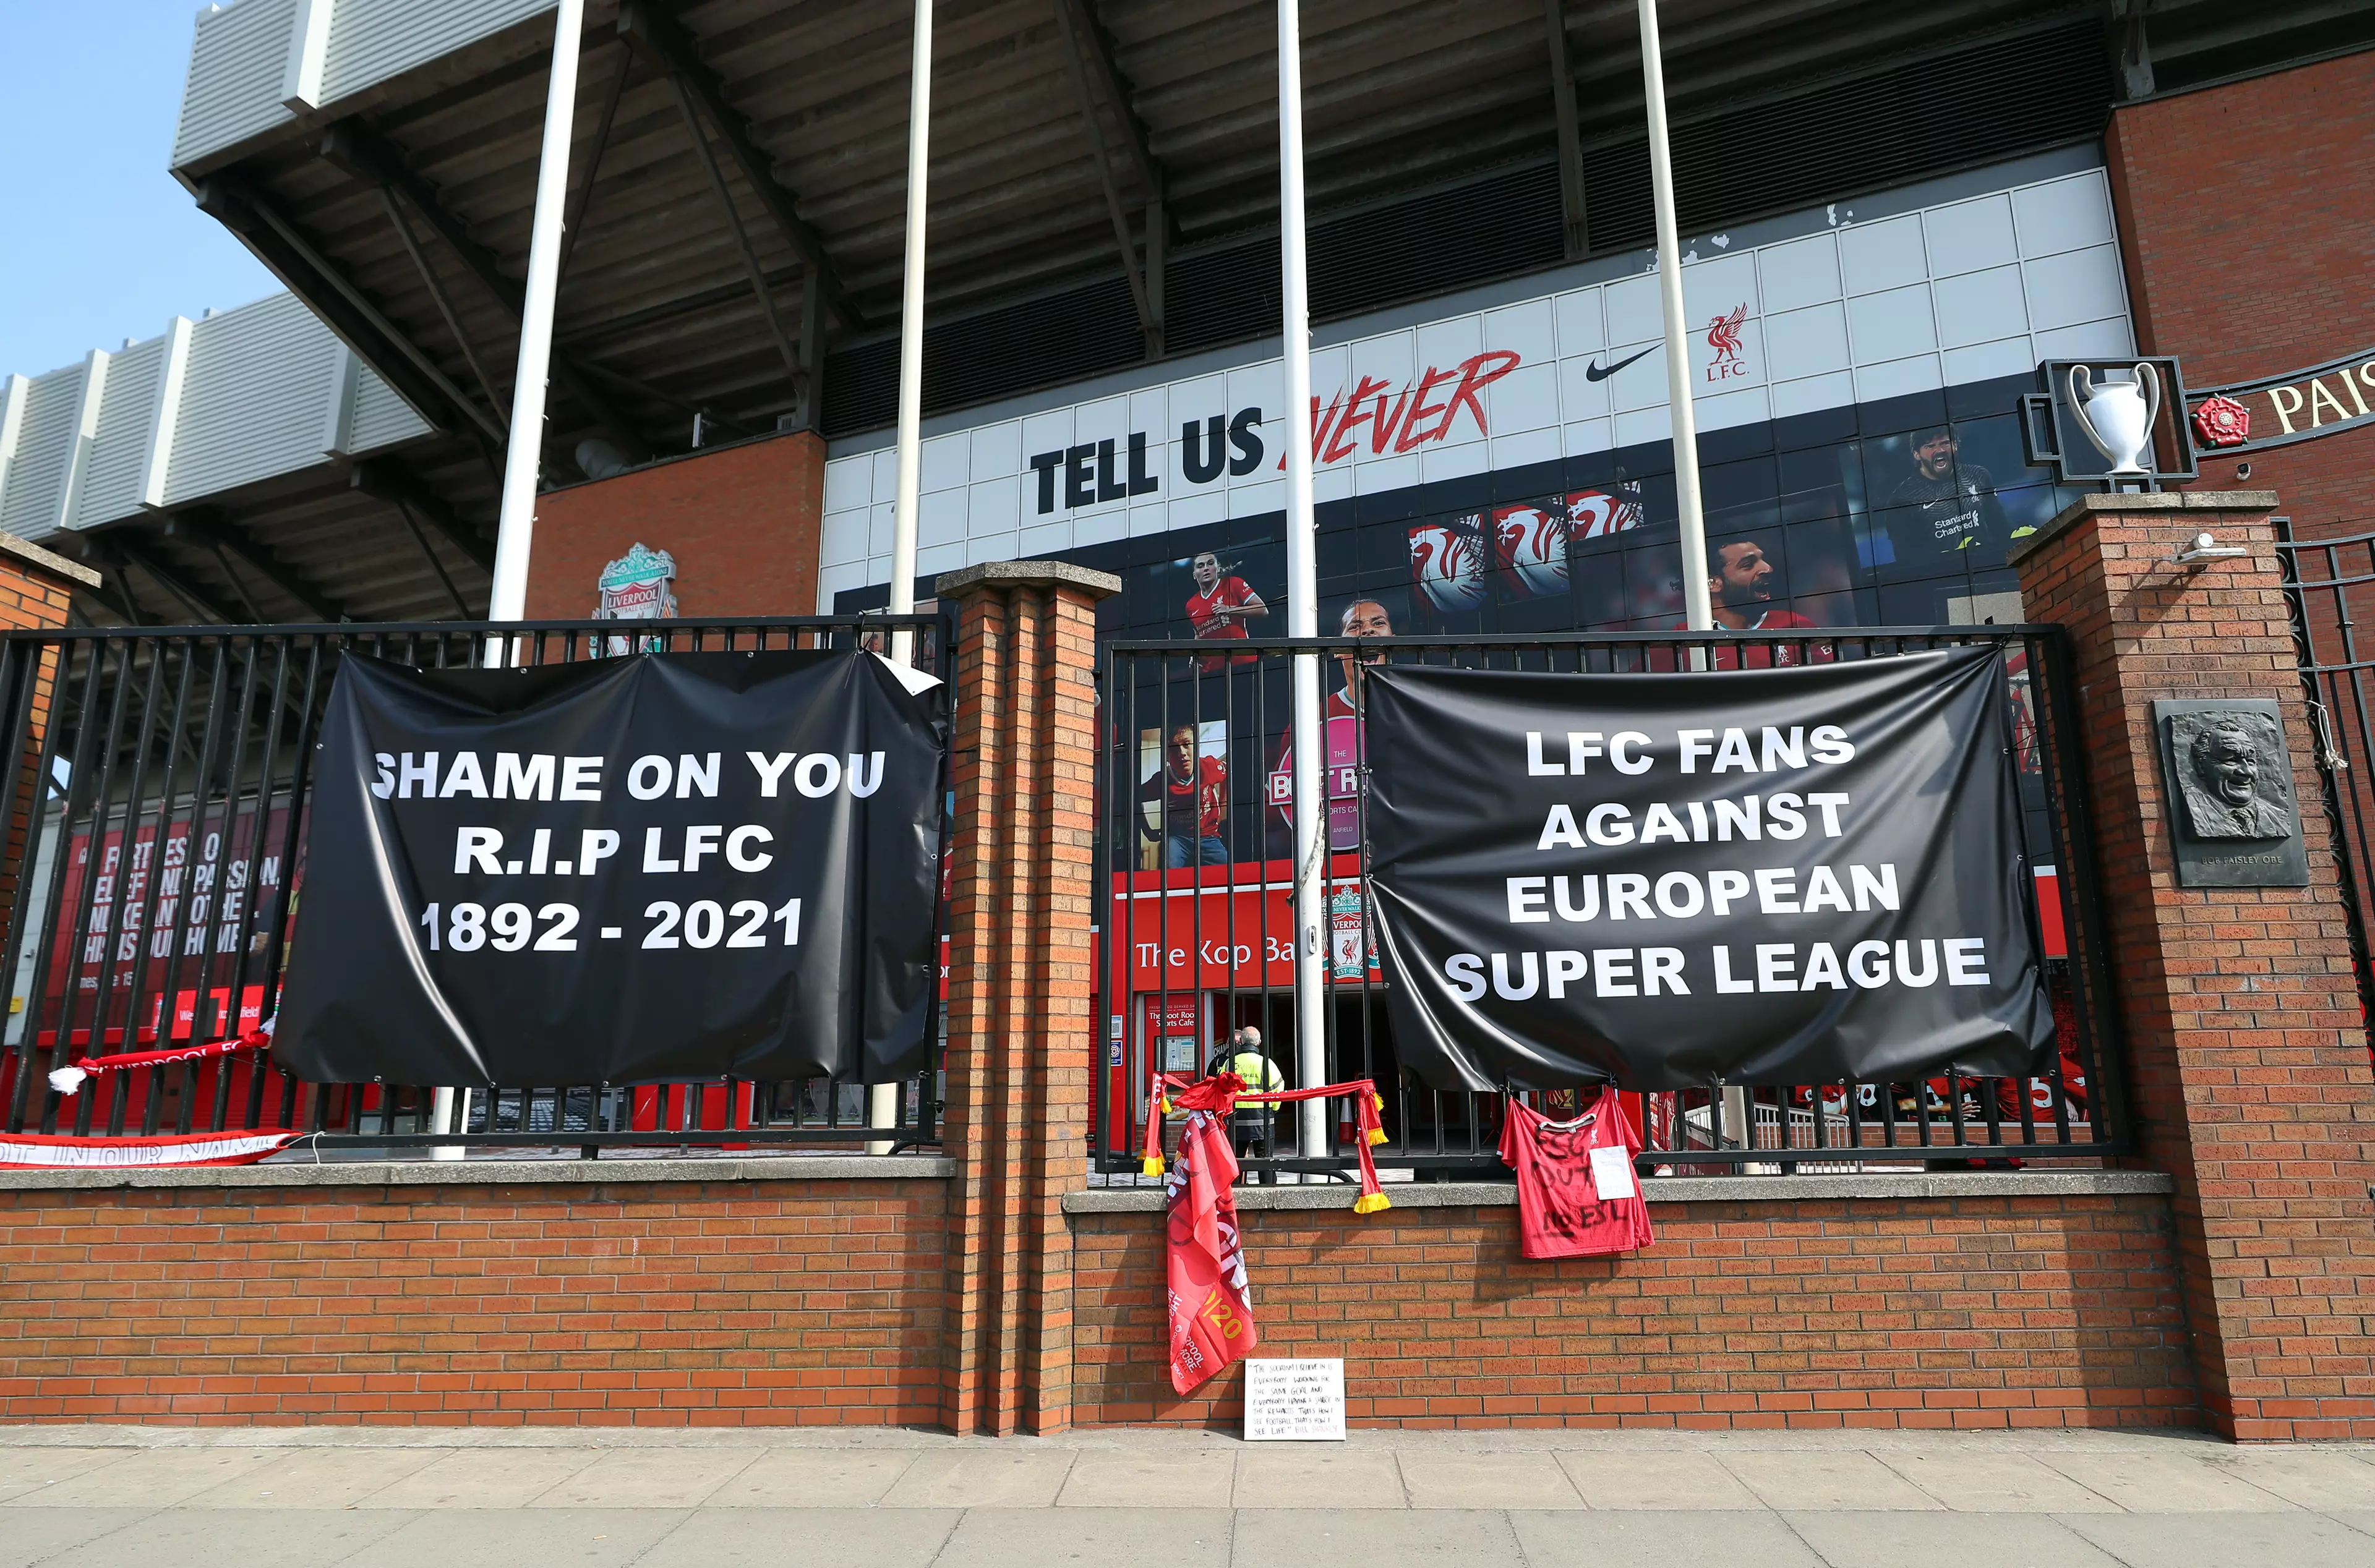 Banners were also erected outside Liverpool's Anfield stadium.